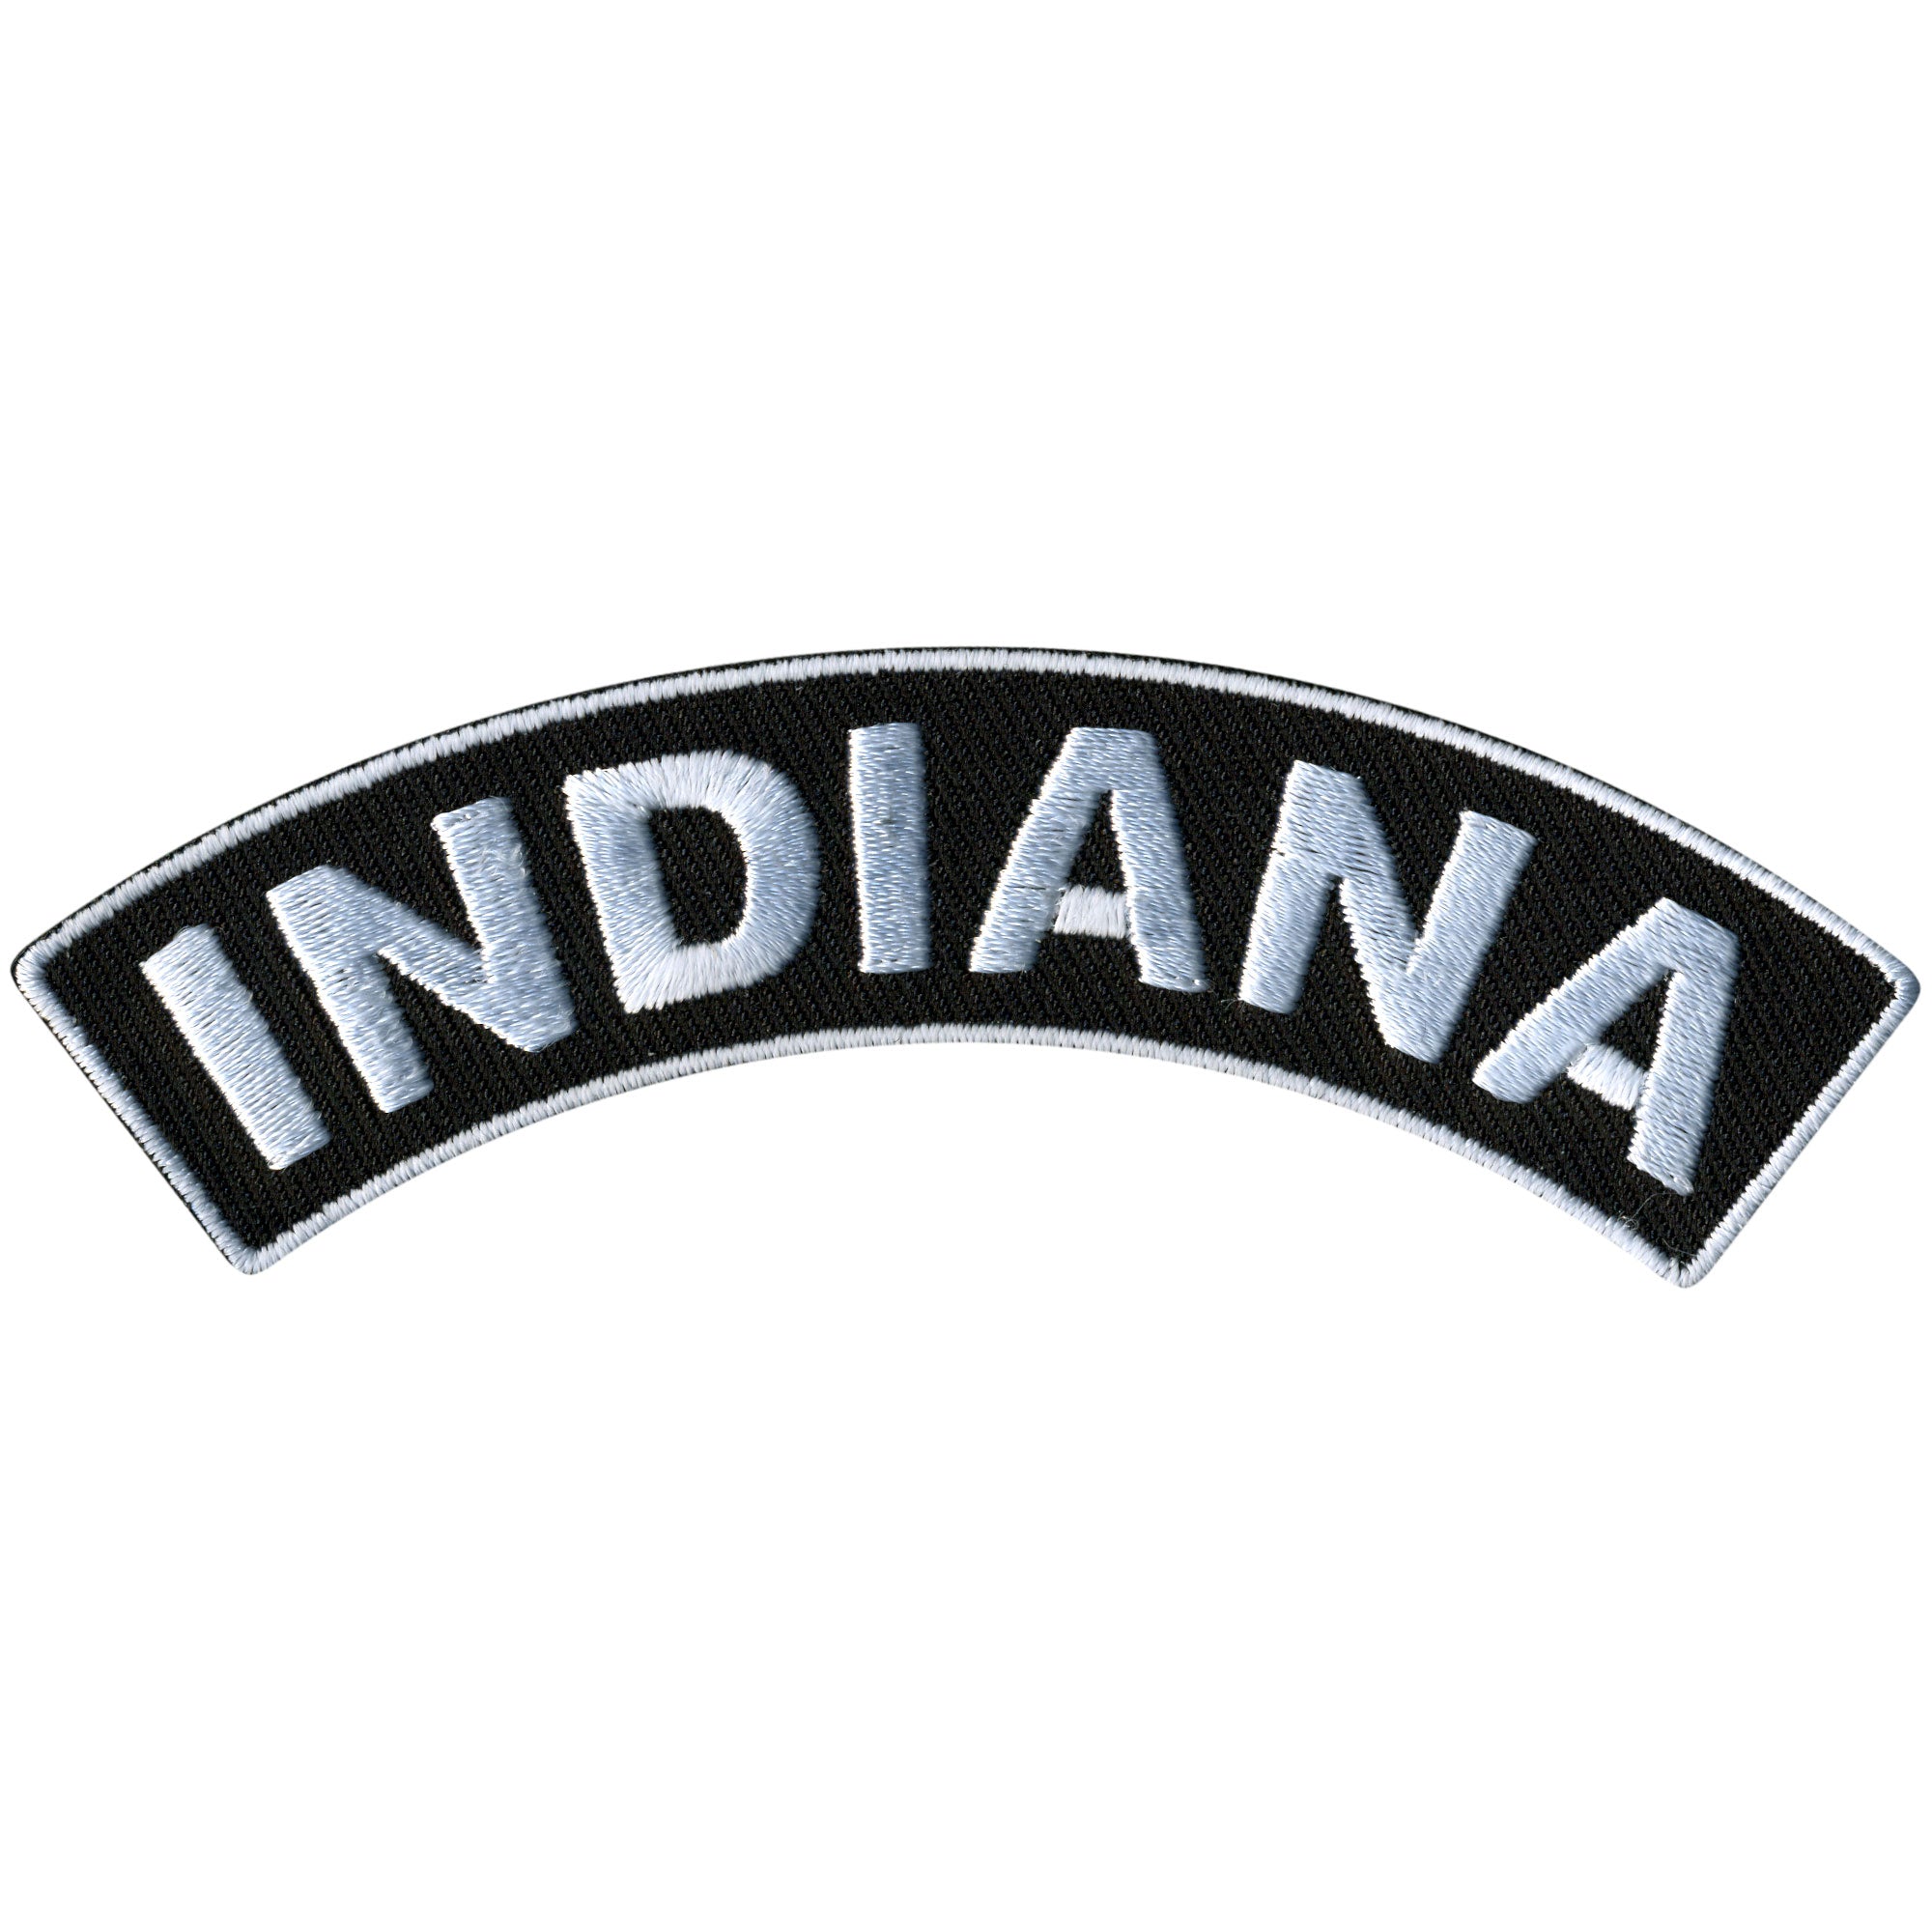 Hot Leathers Indiana 4” X 1” Top Rocker Patch